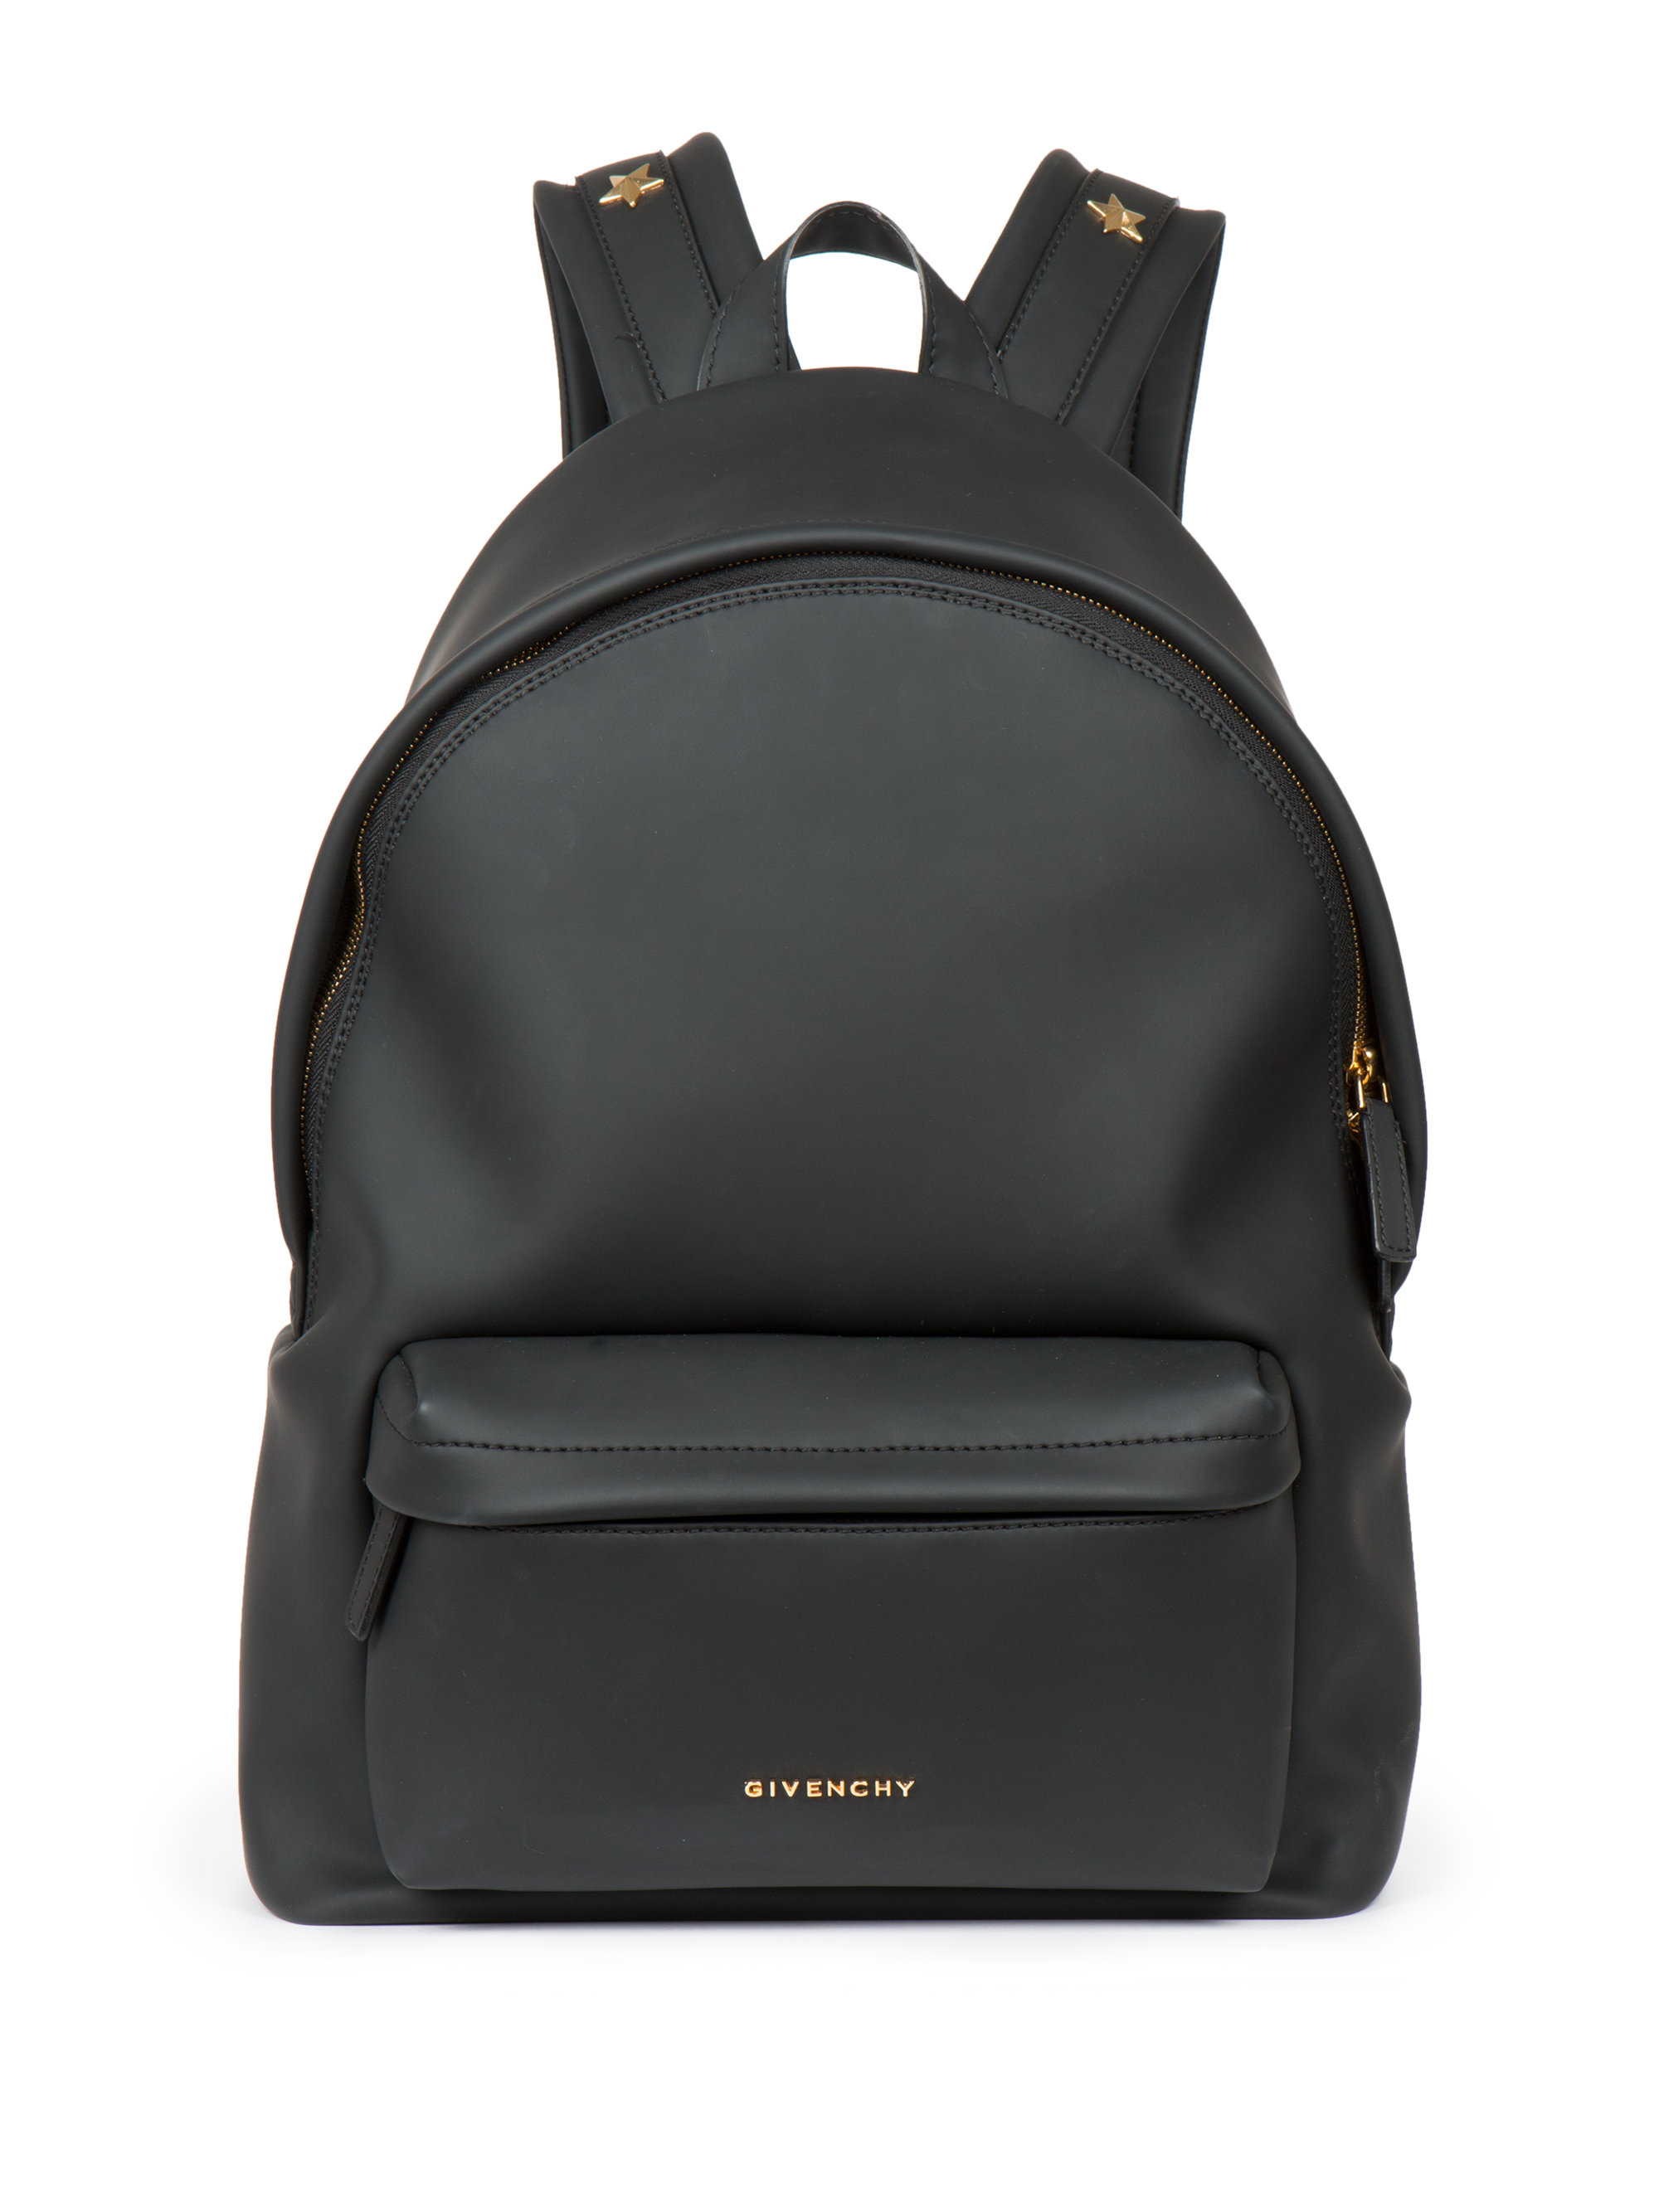 givenchy black leather backpack